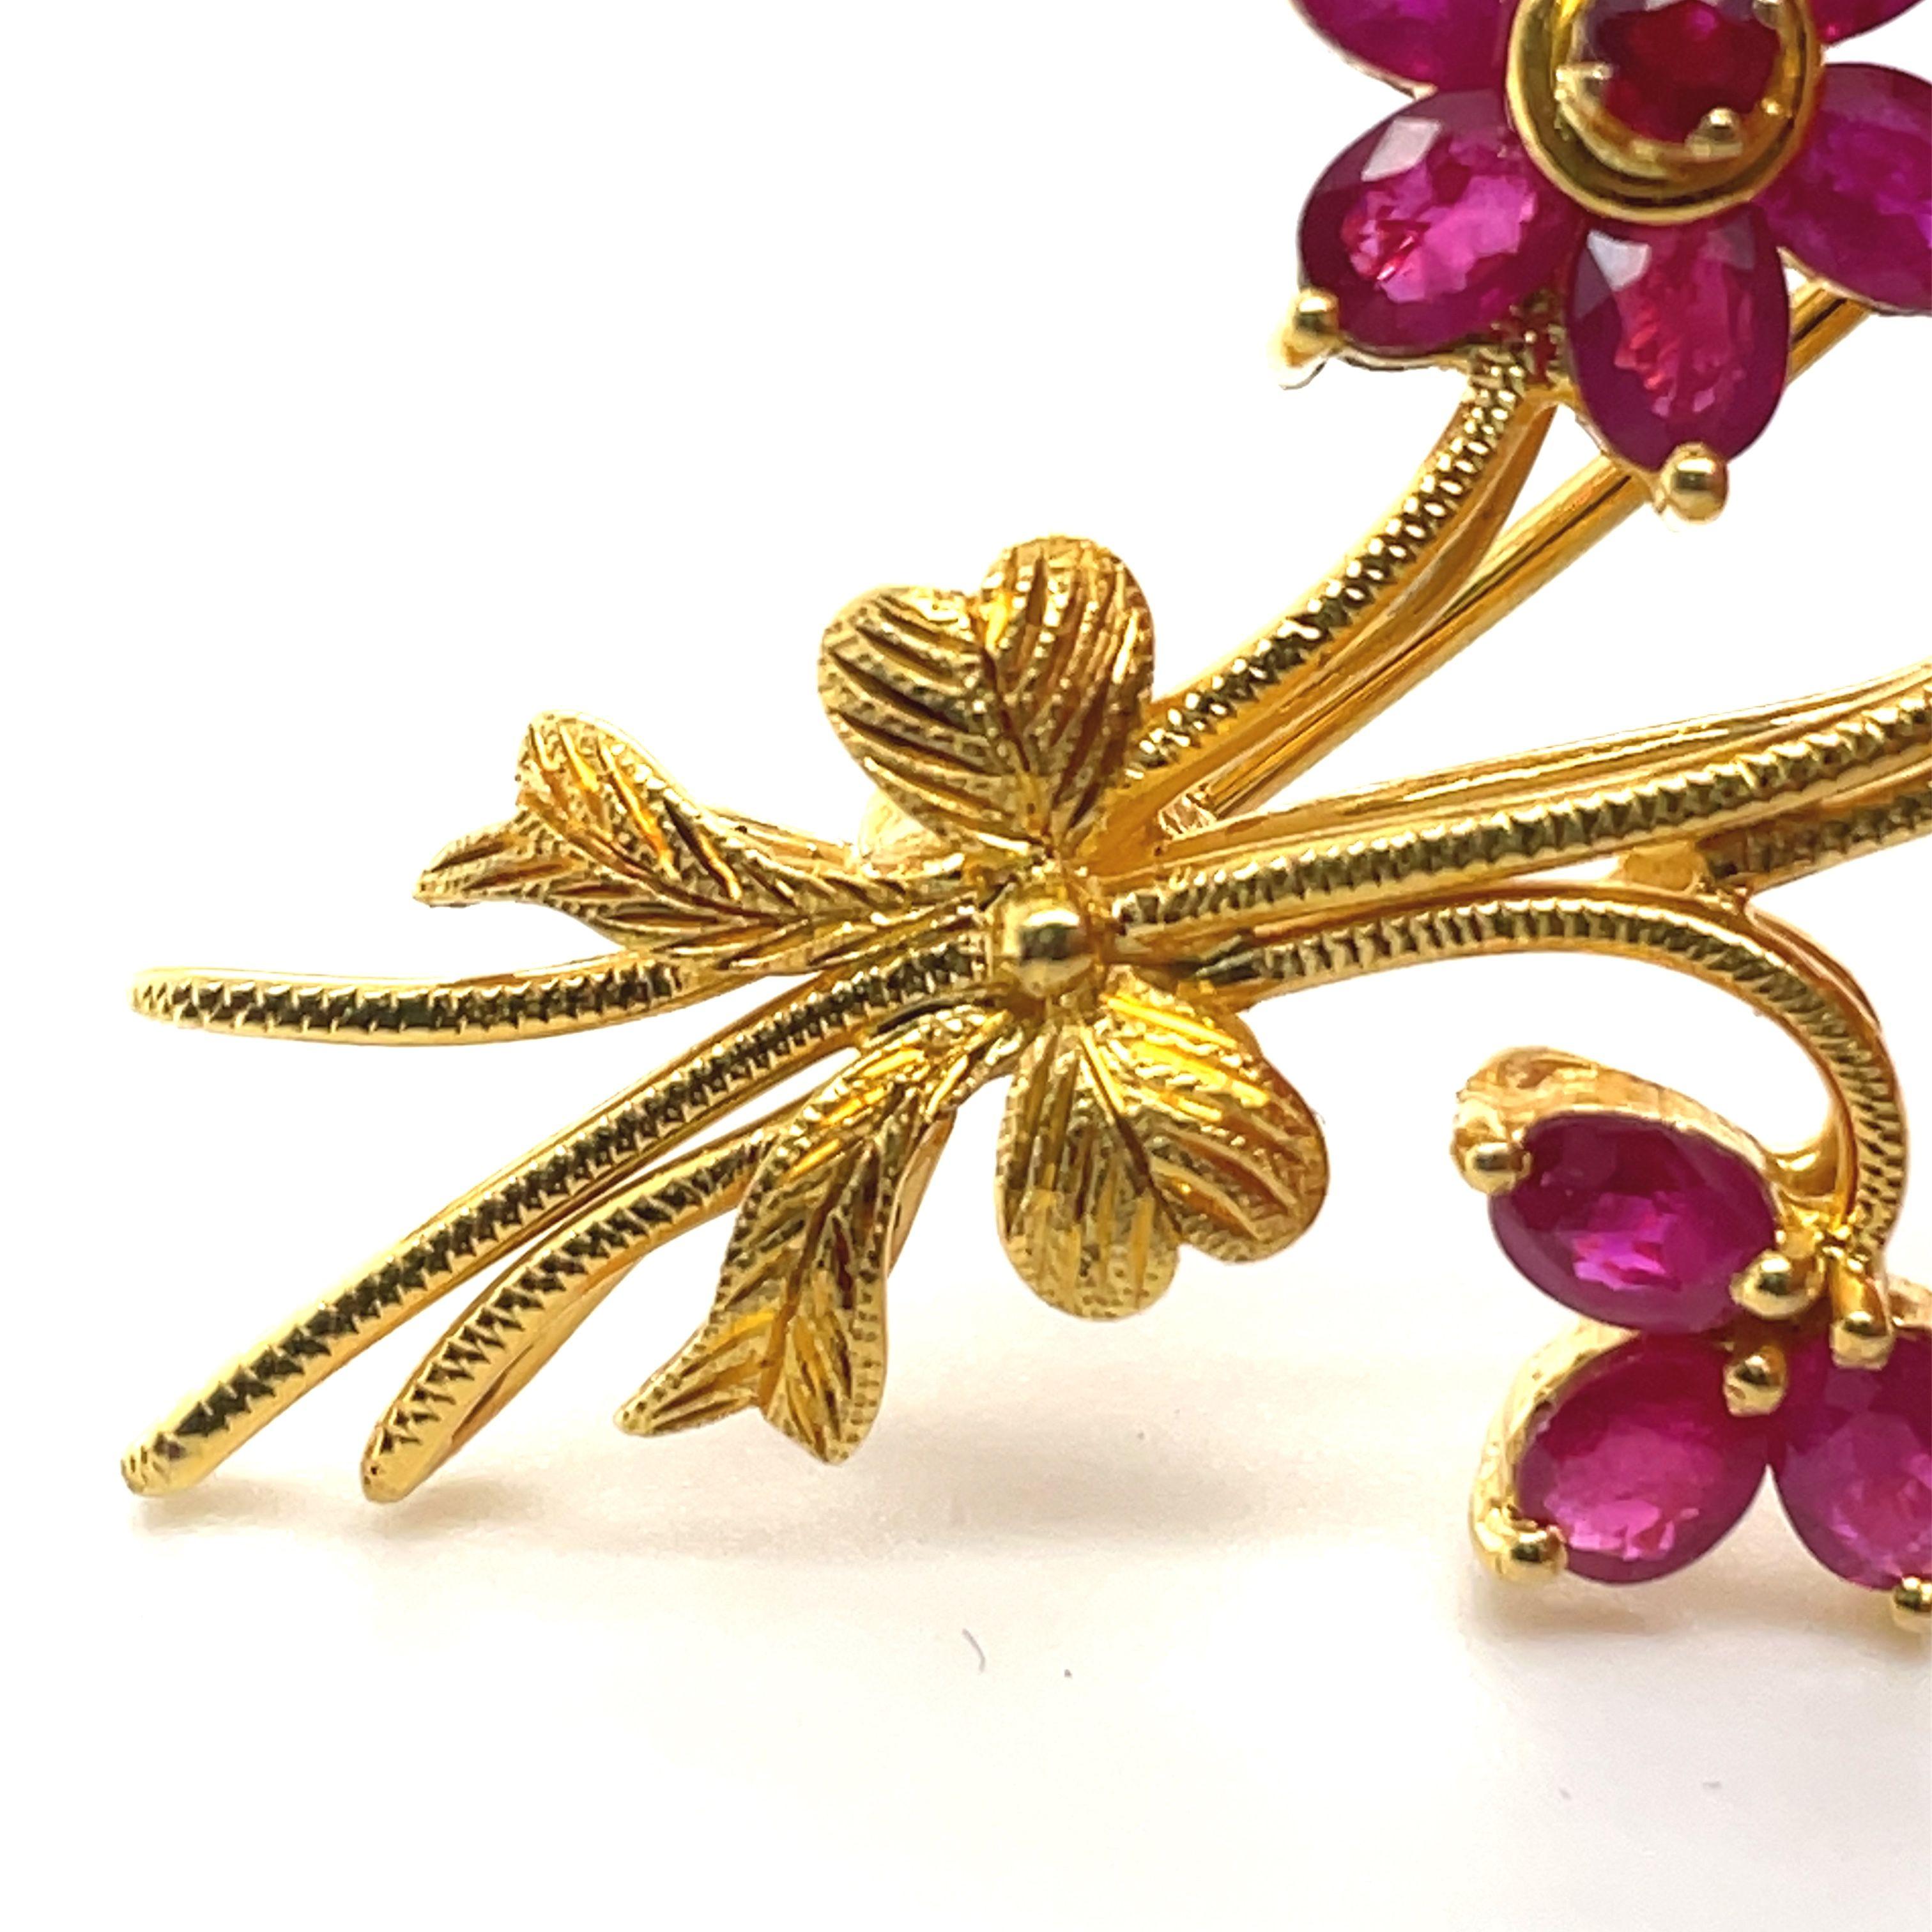 Vintage Flowers Brooch-  22K Yellow gold, 2CT Natural Ruby, Vintage Brooch, Estate Brooch, Vintage Ruby Jewelry, Estate Jewelry, Free Shipping

Jewelry Material: Yellow Gold 22k 
Total Carat Weight: 2ct (Approx.)
Total Metal Weight:8.640g
Size: